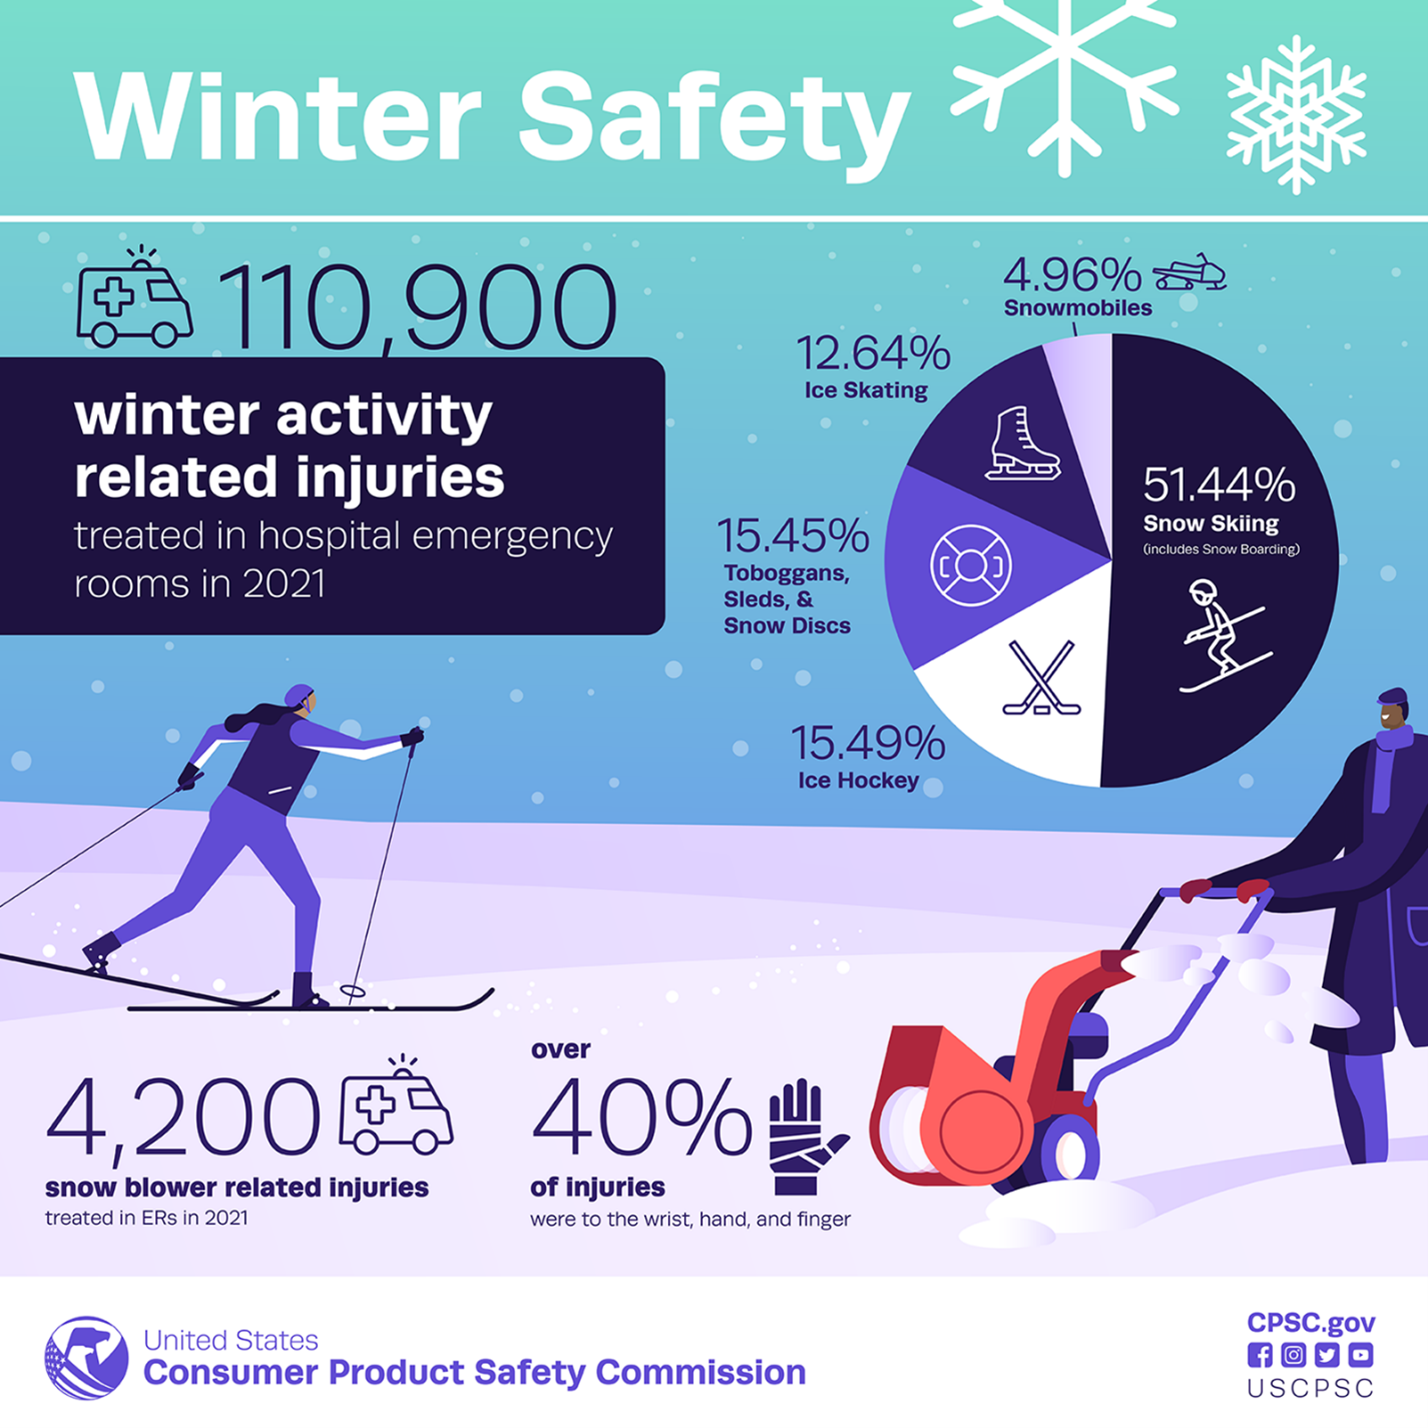 Cold Warning and Winter Safety Tips